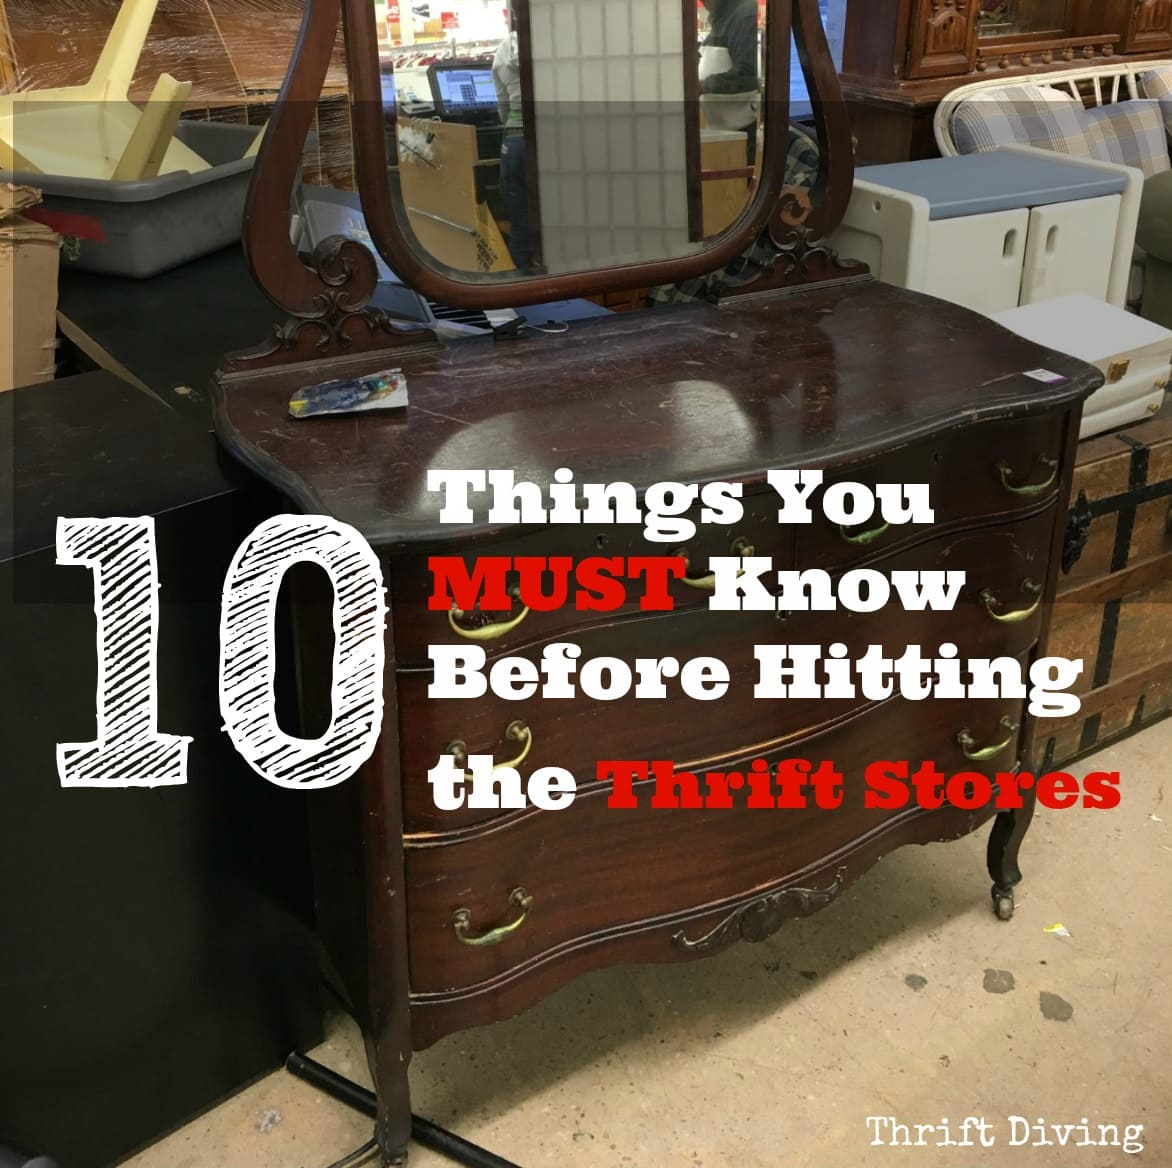 10 things you MUST know before hitting the thrift store: thrift tips - Thrift Diving